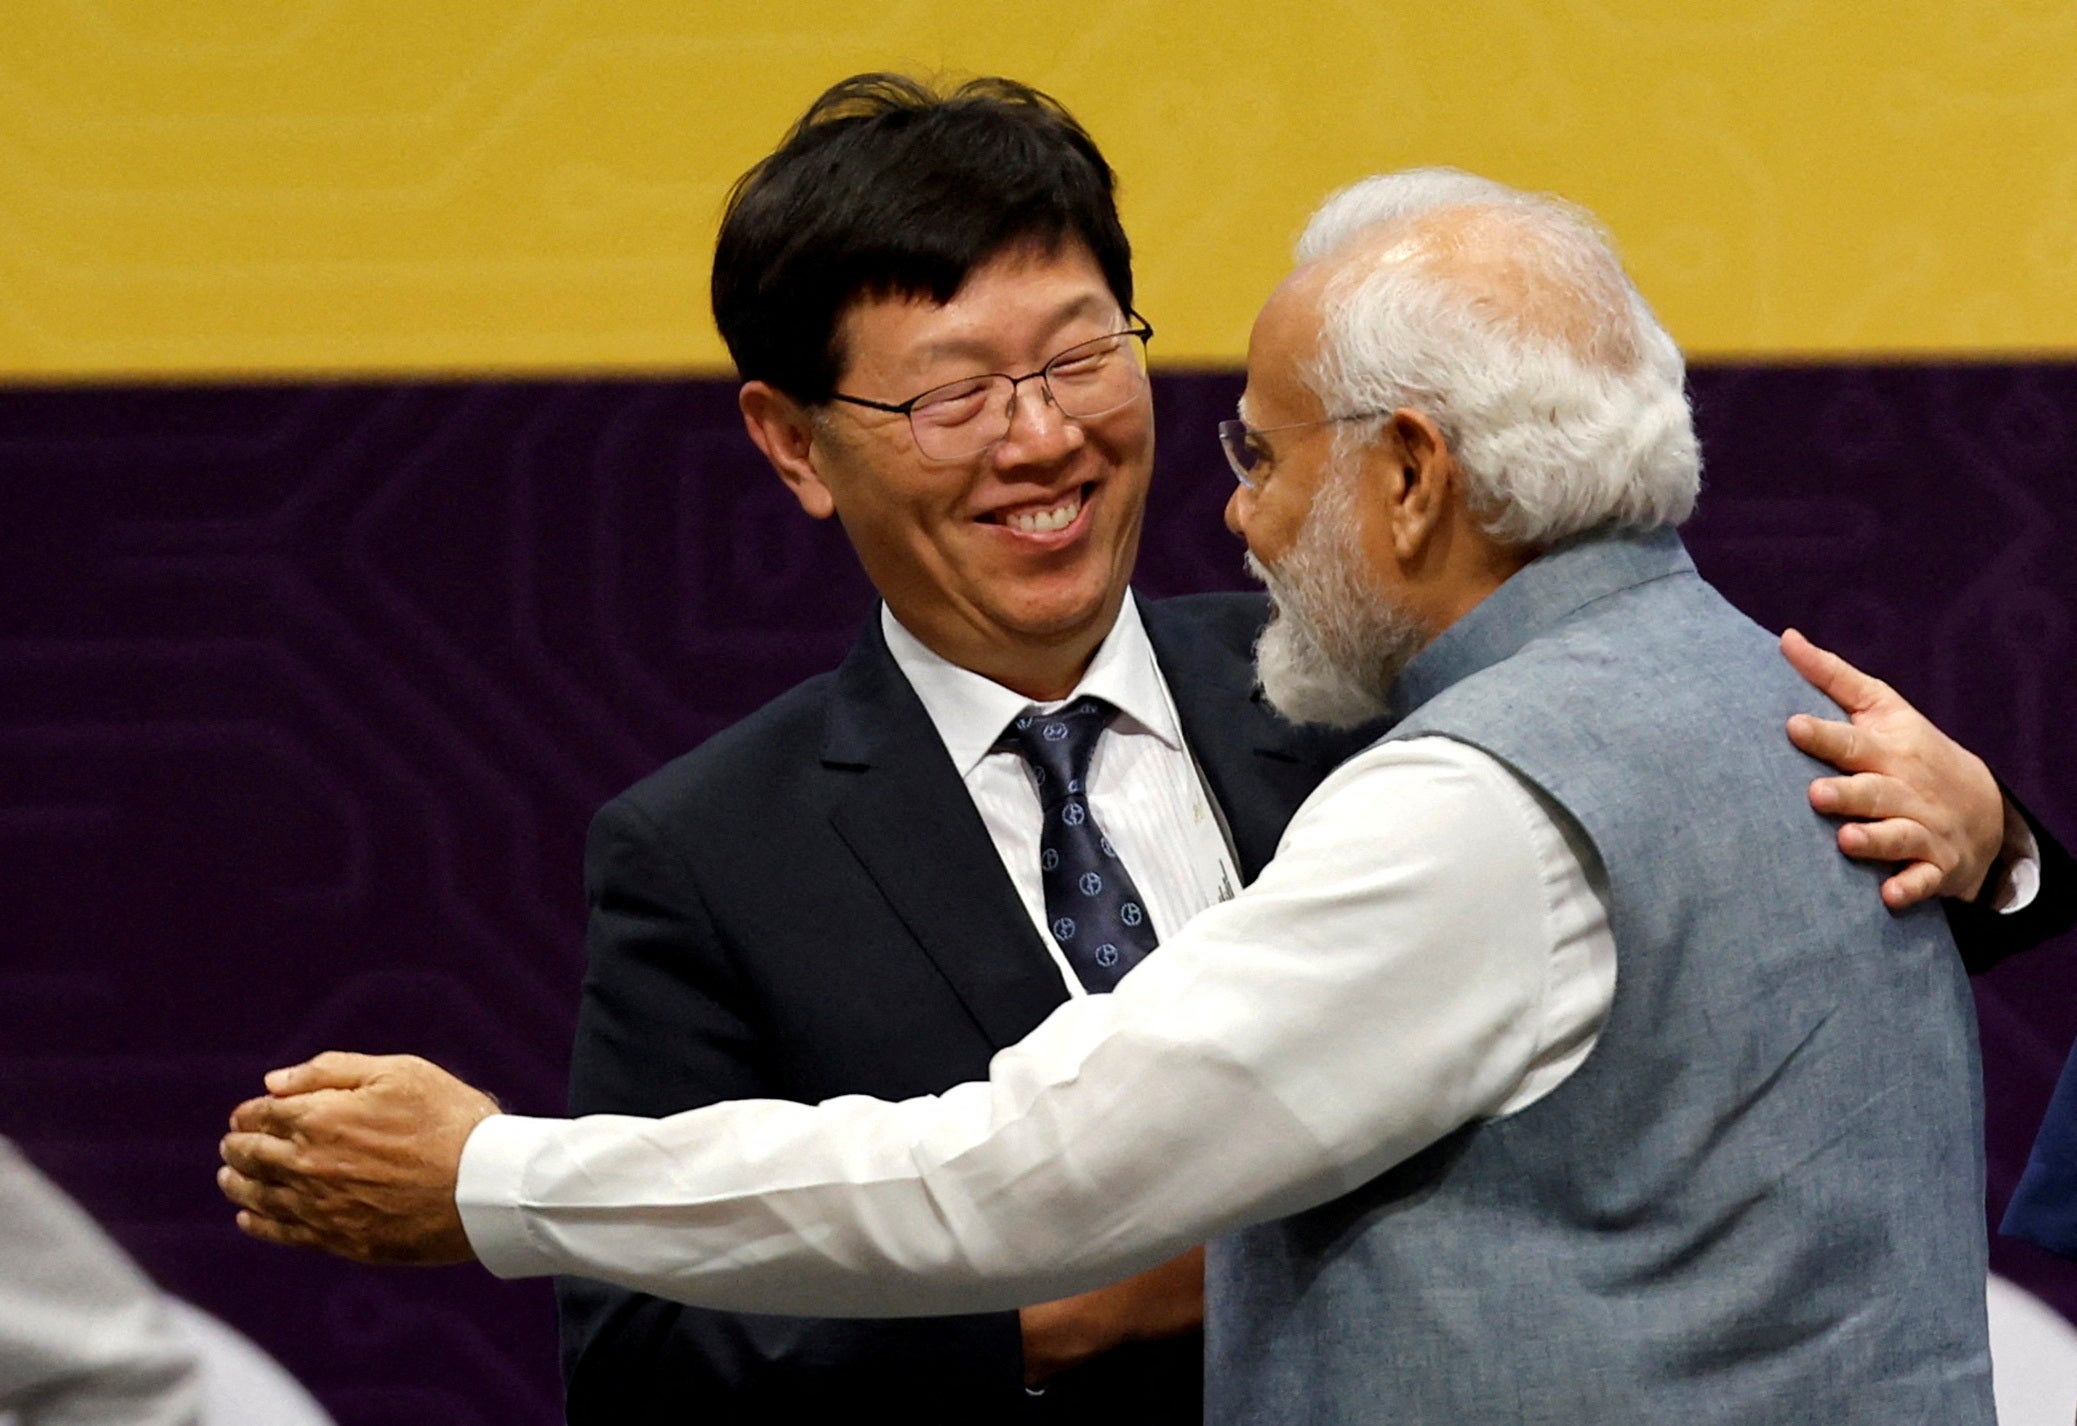 Indian prime minister Narendra Modi greets Foxconn chief Young Liu at a semiconductor conference in Gandhinagar city